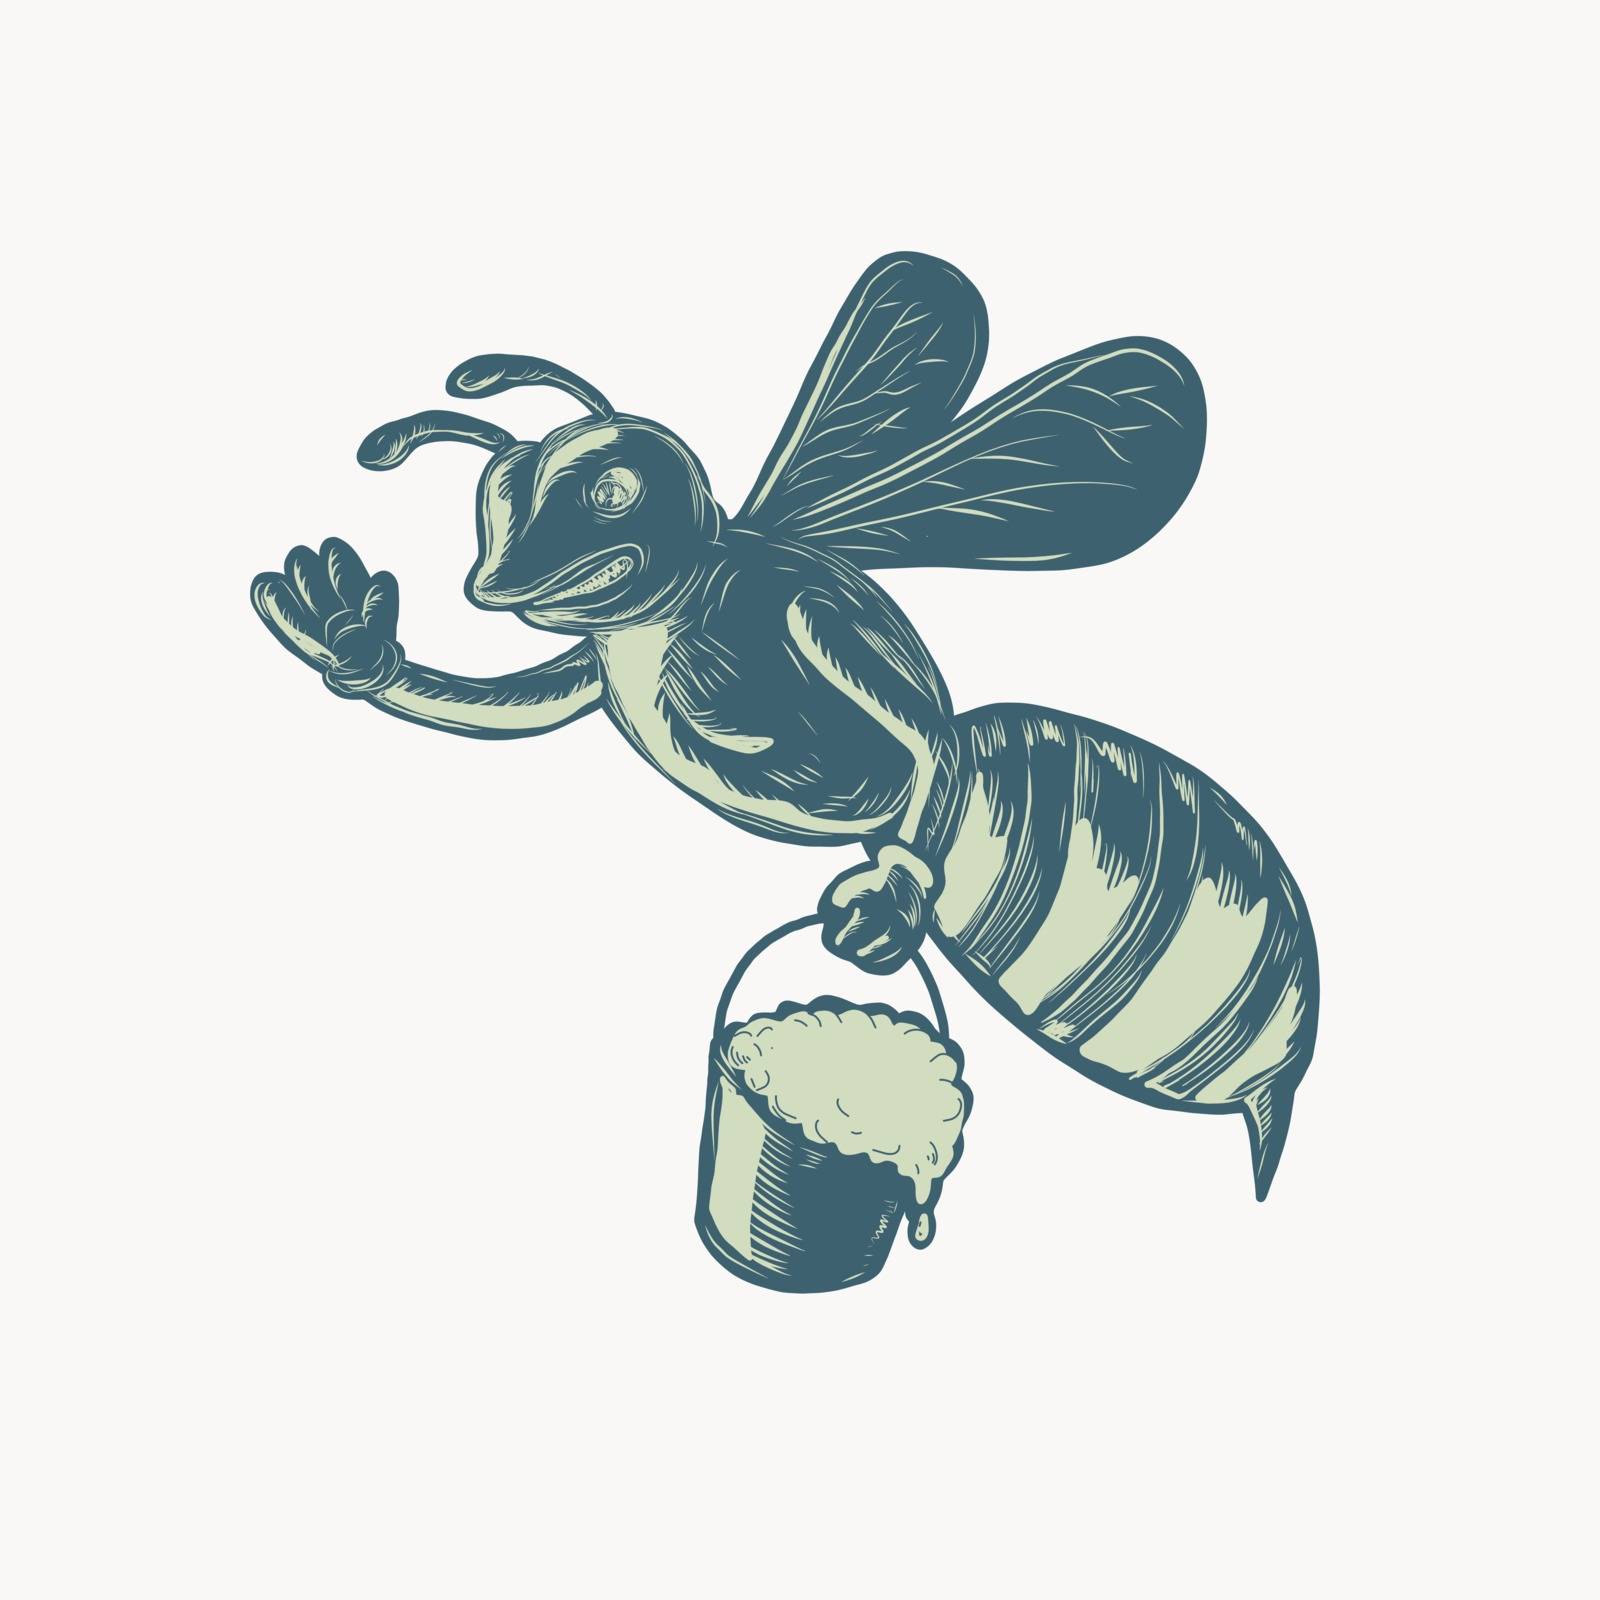 Scratchboard style illustration of a honey bee waving carrying a pail of dripping honey done on scraperboard on isolated background.